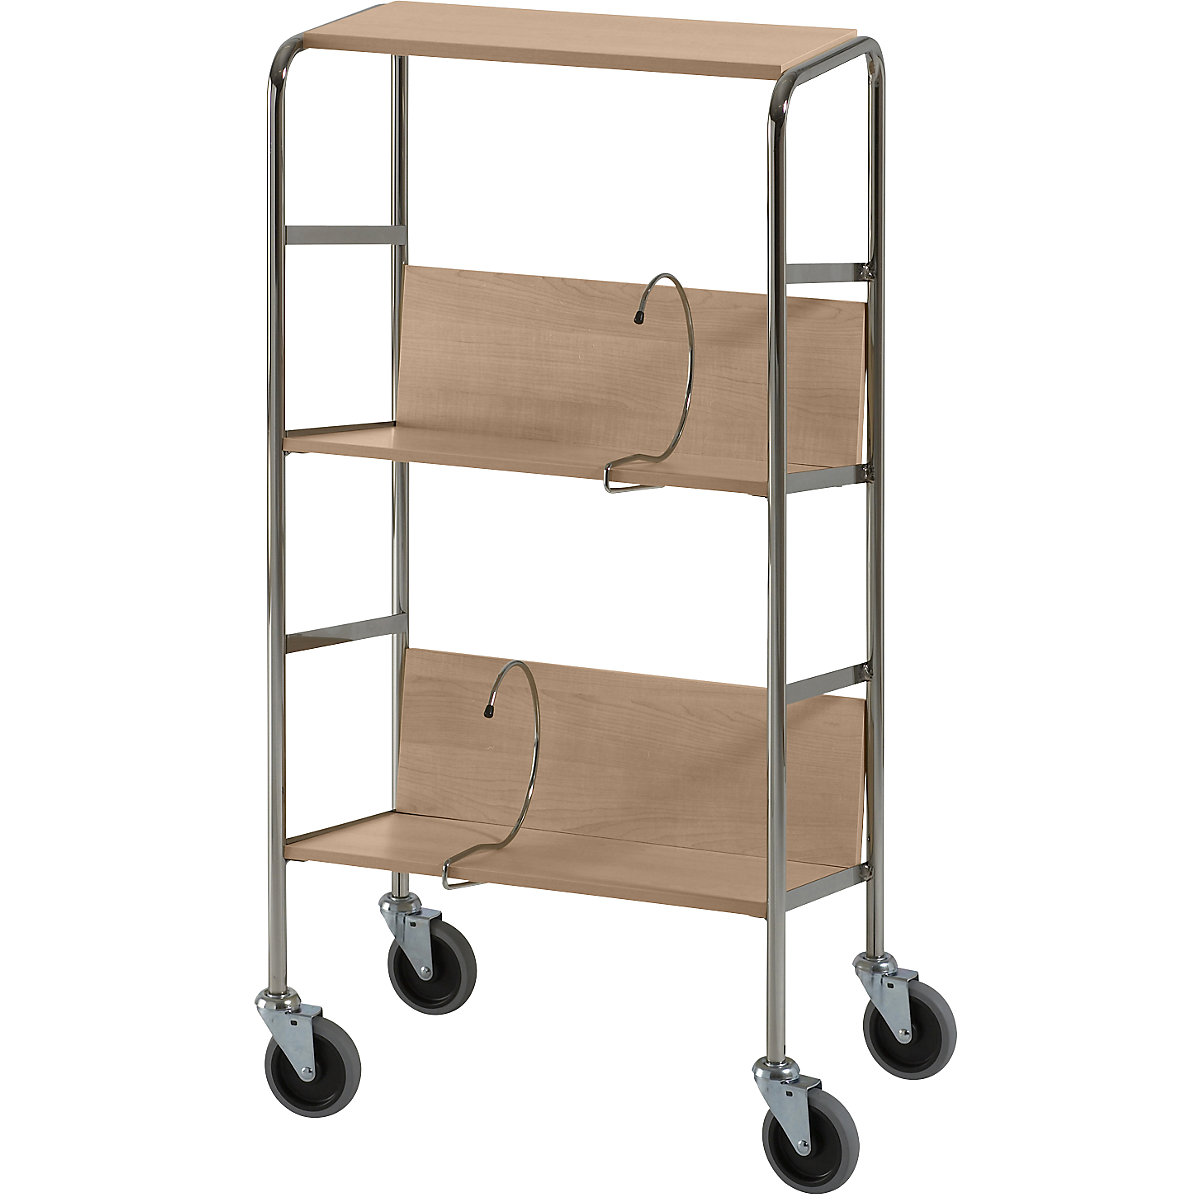 File trolley with top shelf, chrome plated – HelgeNyberg, 3 shelves, LxWxH 550 x 340 x 1060 mm, oak finish, 5+ items-27